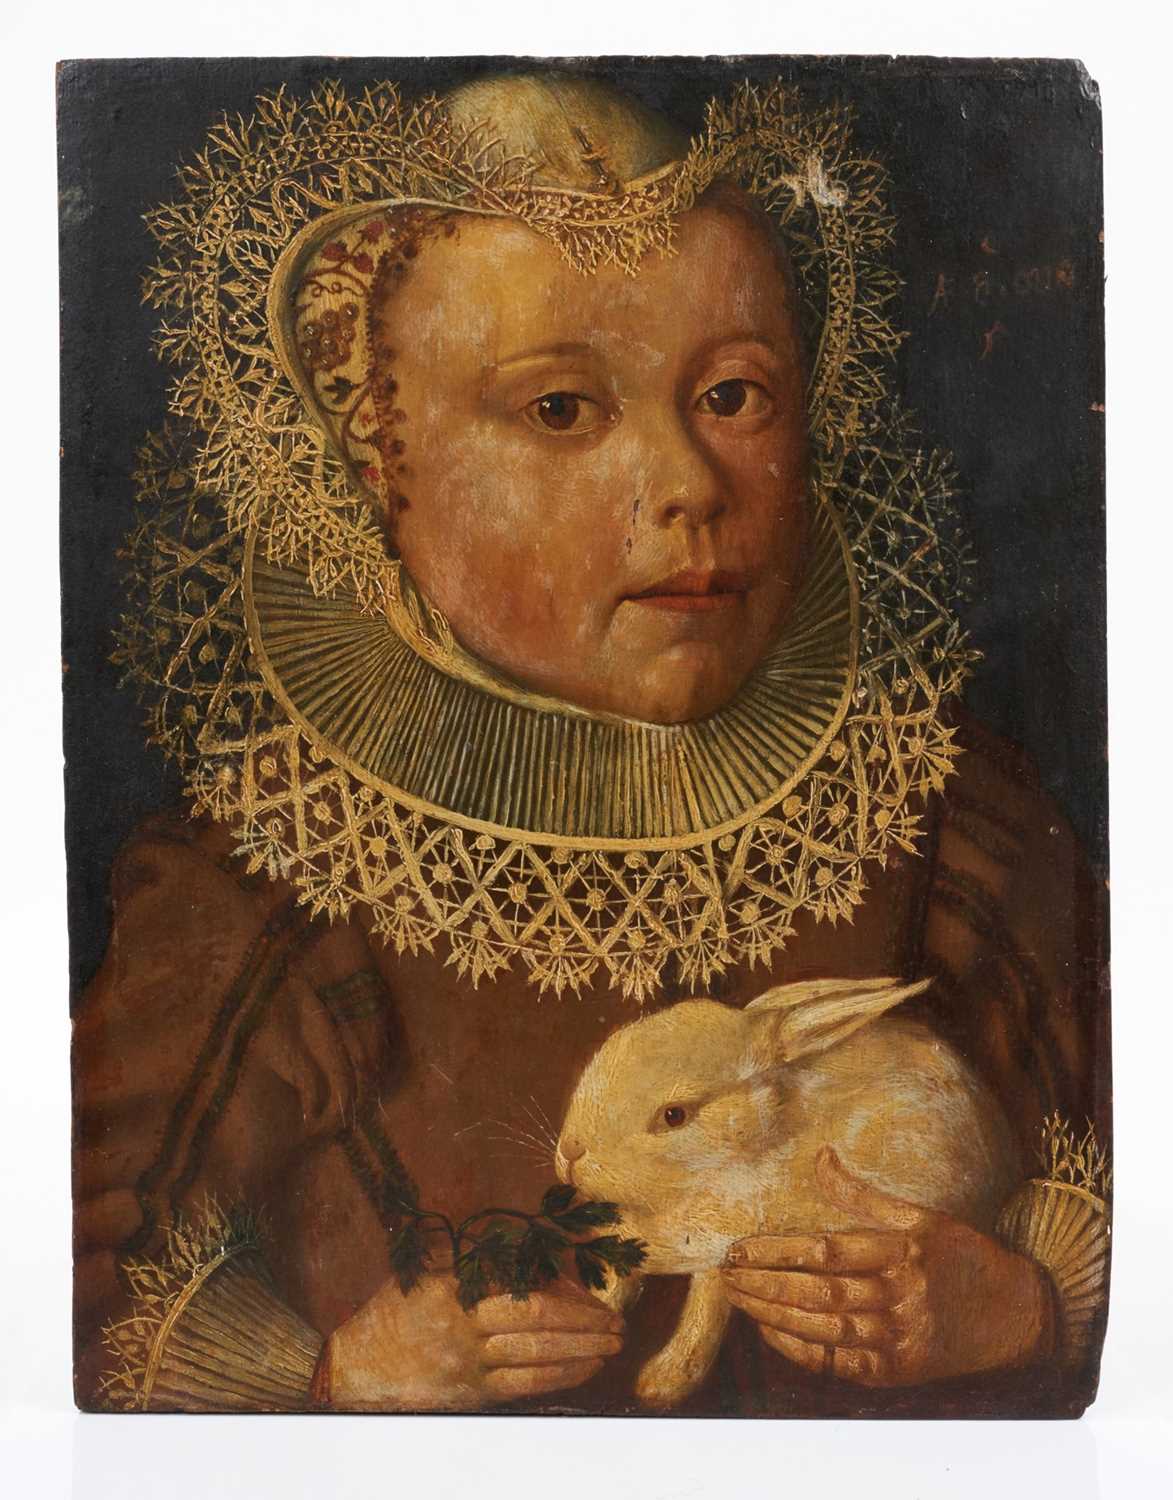 Lot 1175 - Manner of Marcus Gheeraerts the Younger (c.1561/62-1636) oil on panel - portrait of a child feeding a pet rabbit, 35cm x 27cm, unframed